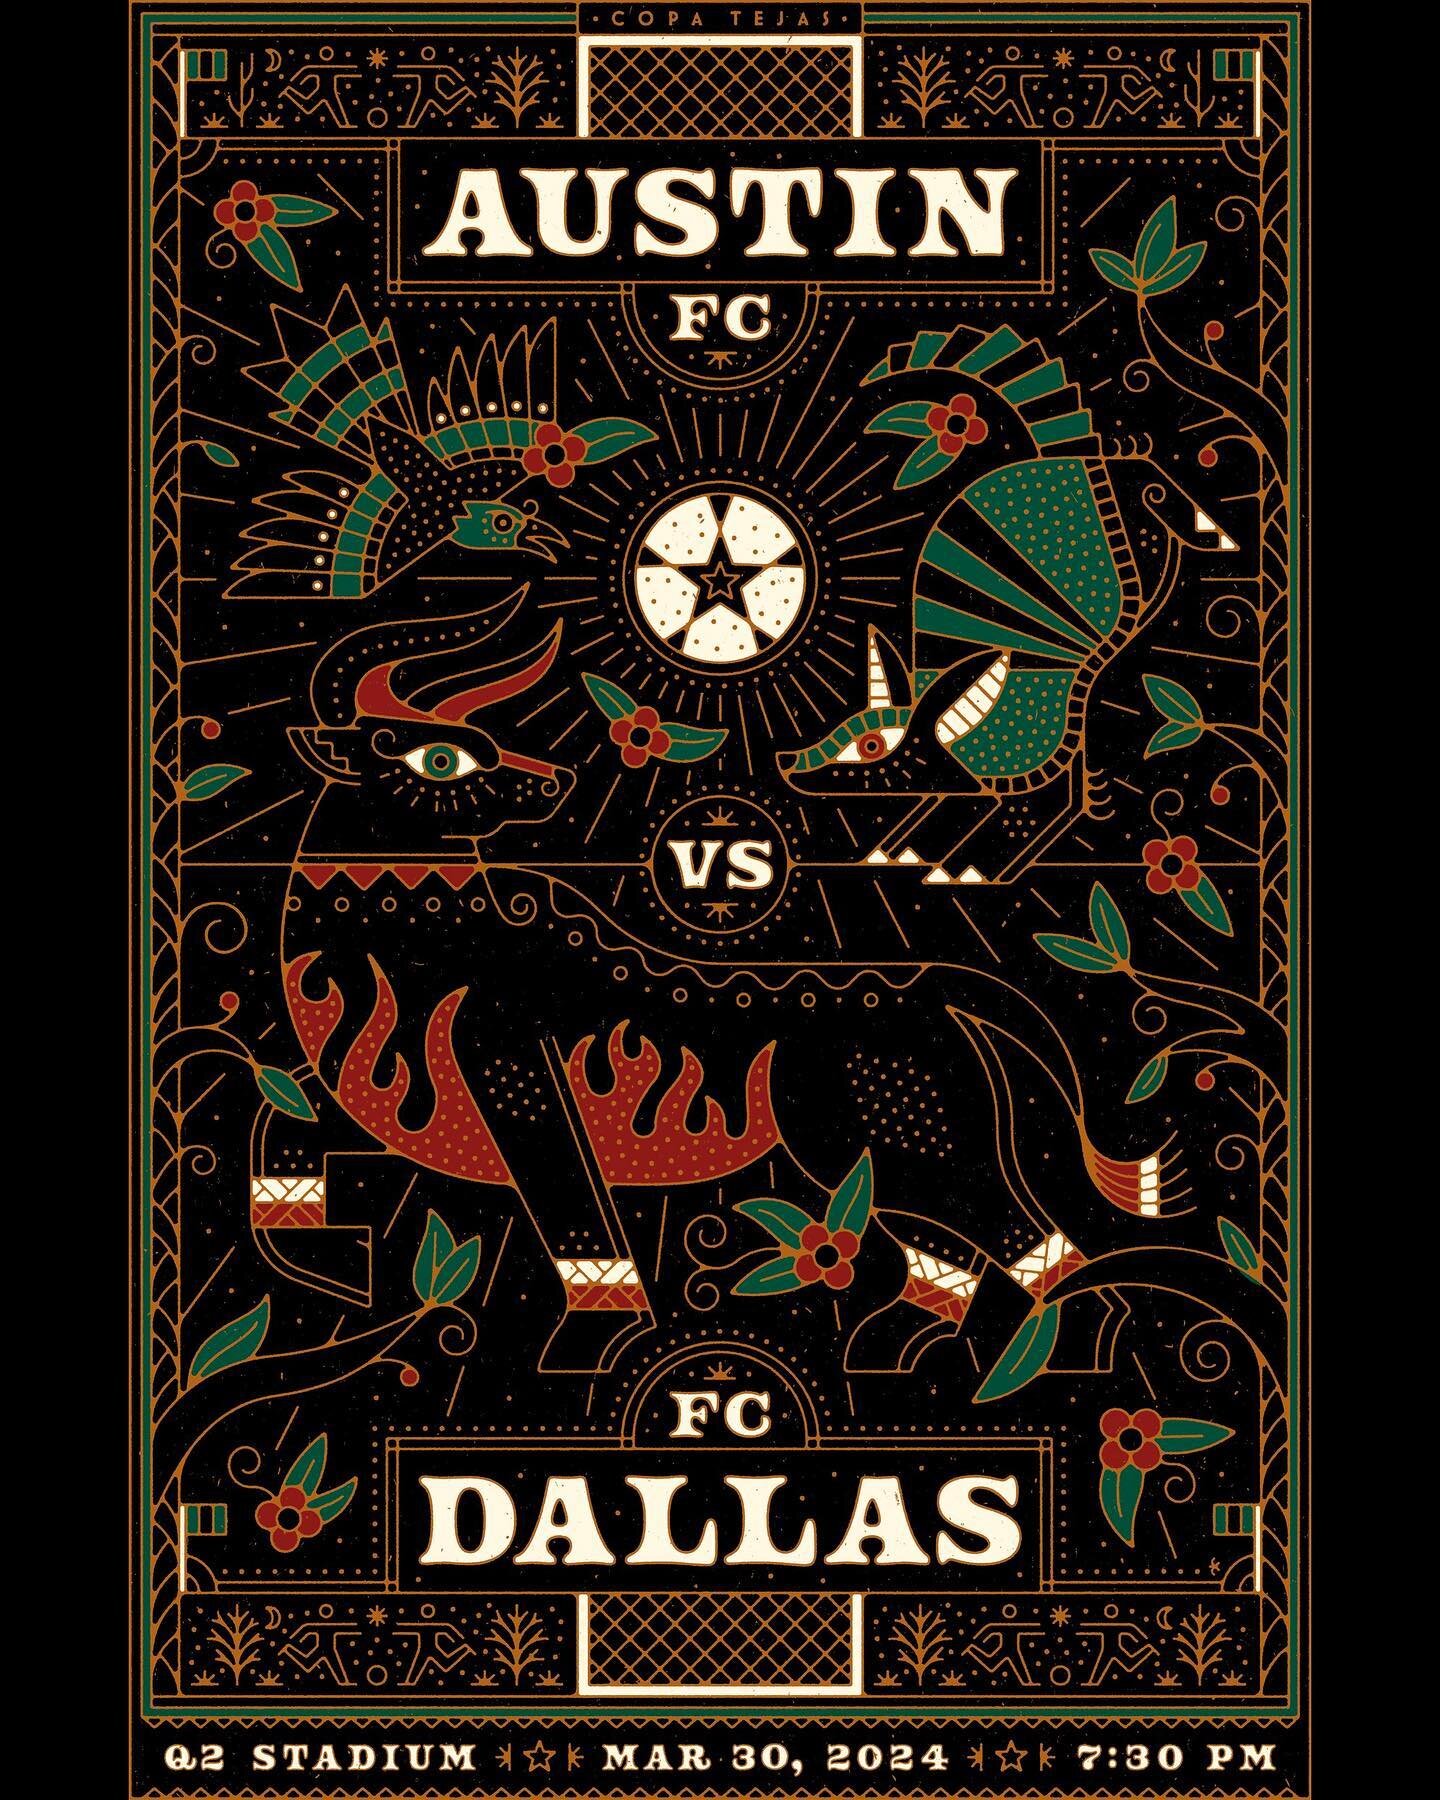 LISTOS! still pinching myself, but I made the gameday poster for the @austinfc big rivalry match vs fc dallas. I first got into graphic design as a young lad because I was obsessed with sports branding, and getting to make something, anything, for my